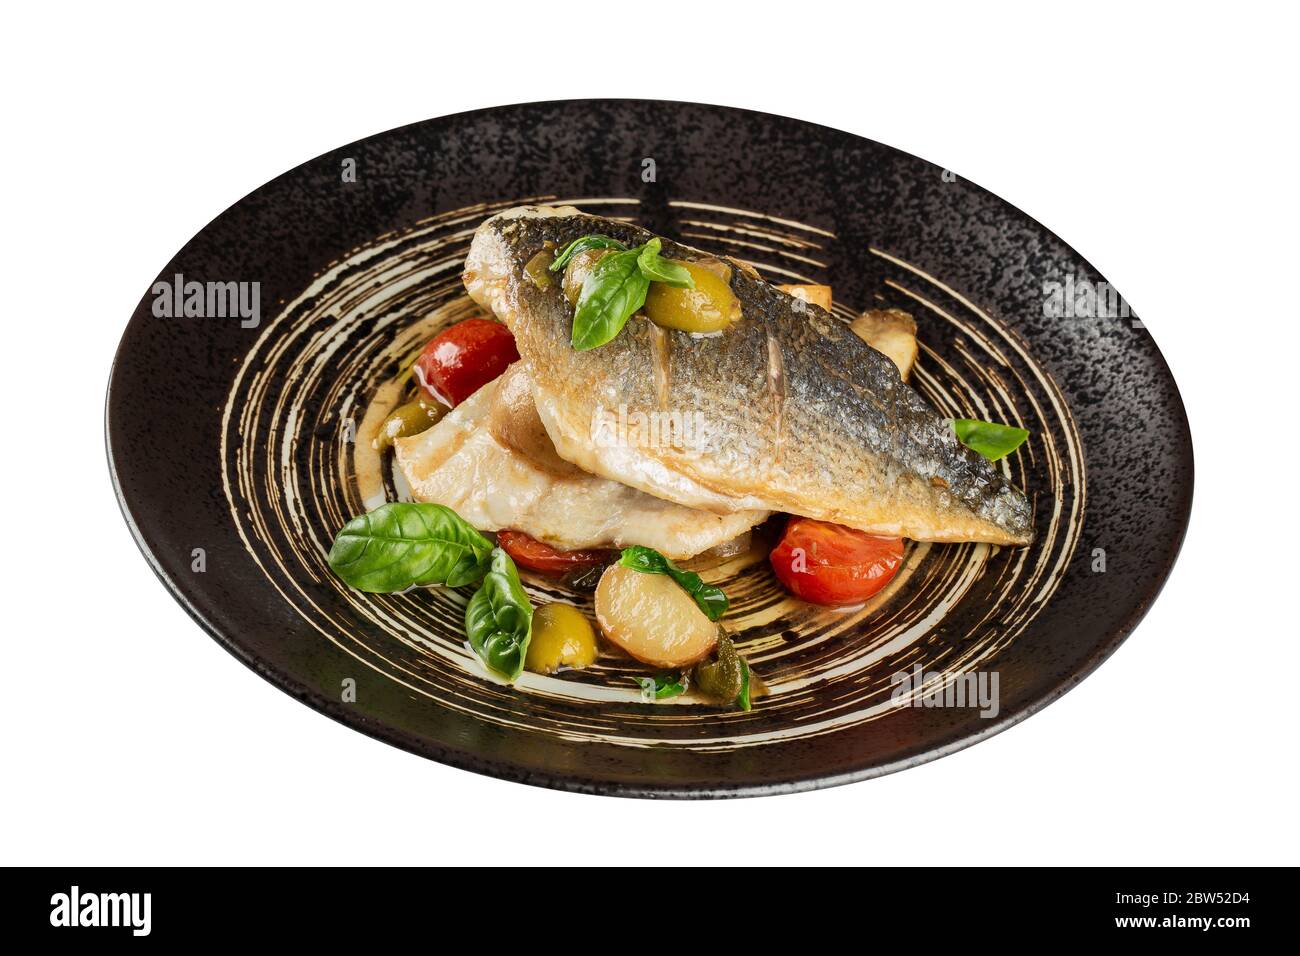 Grilled fish fillet with side dish. Stock Photo